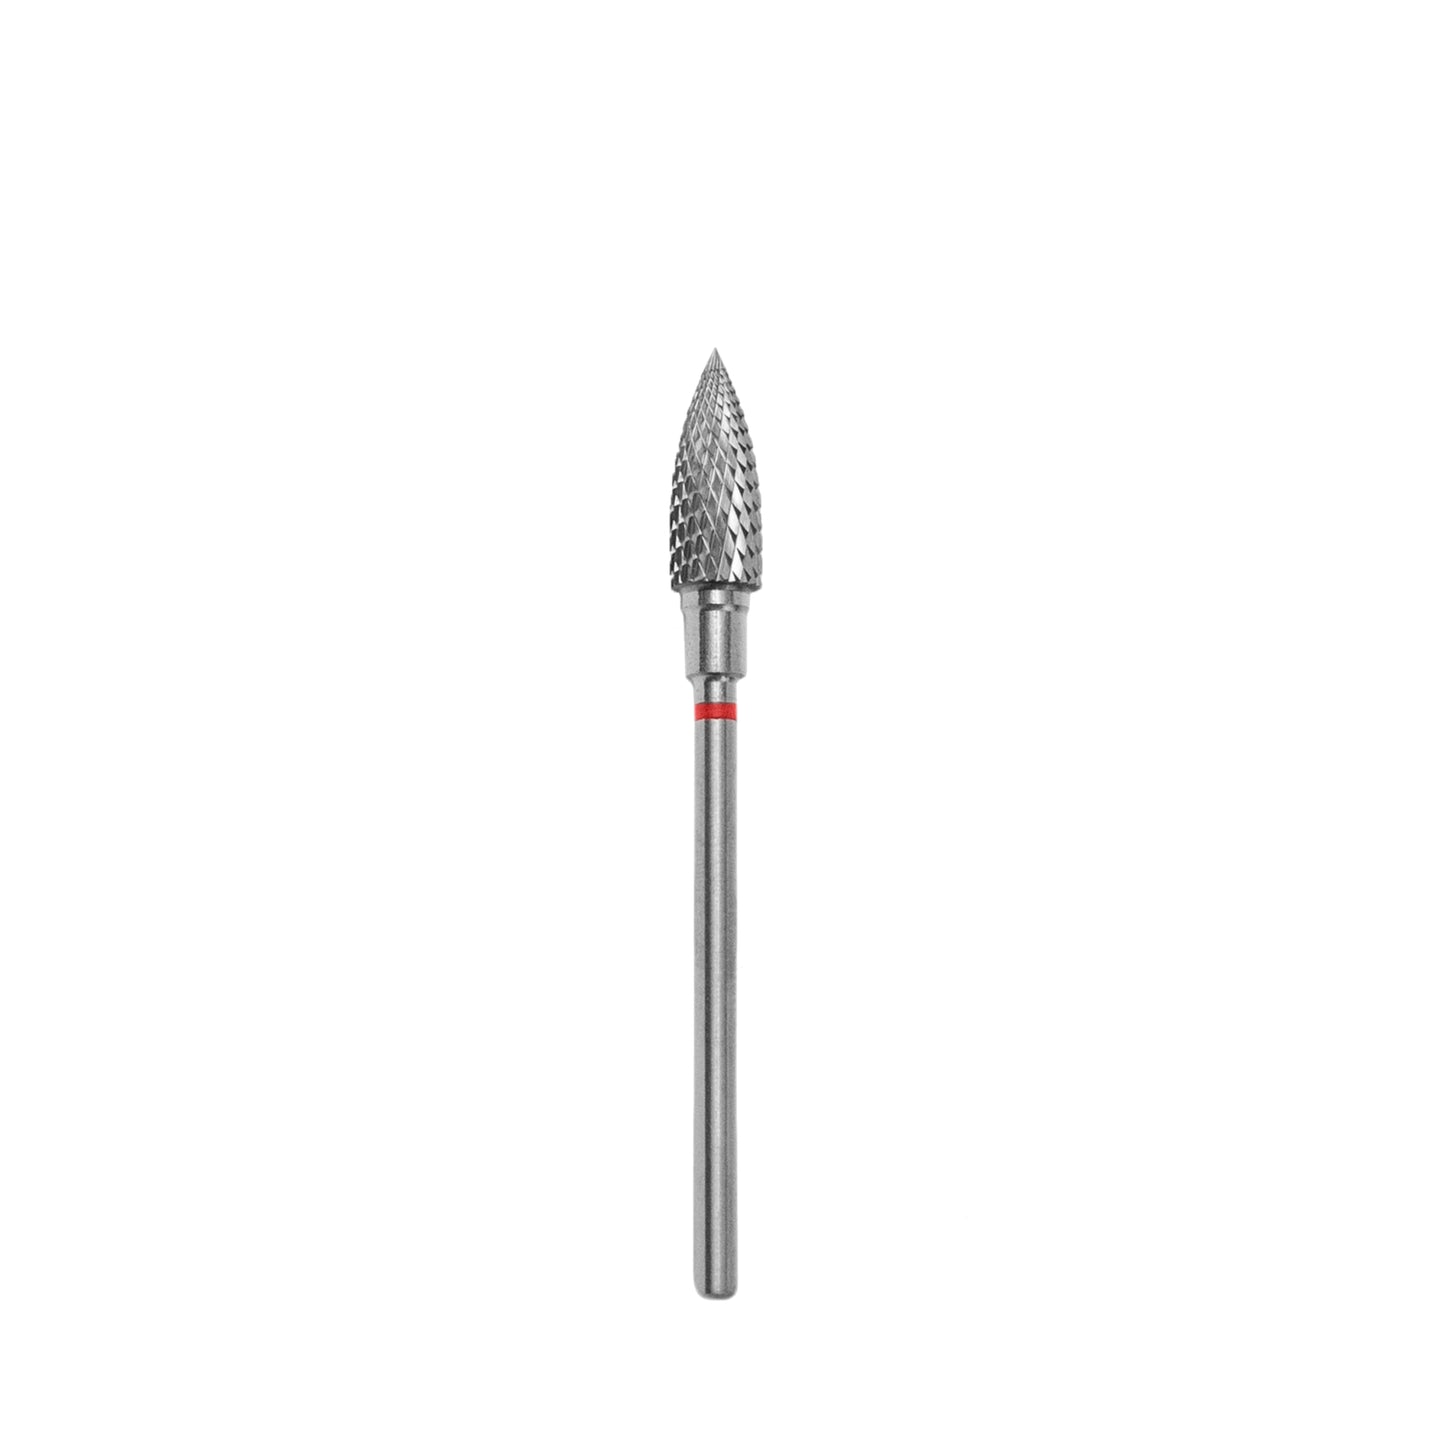 Carbide nail drill bit, “flame”, red, head diameter 5 mm/ working part 13.5 mm(#75) -FT10R050/13.5